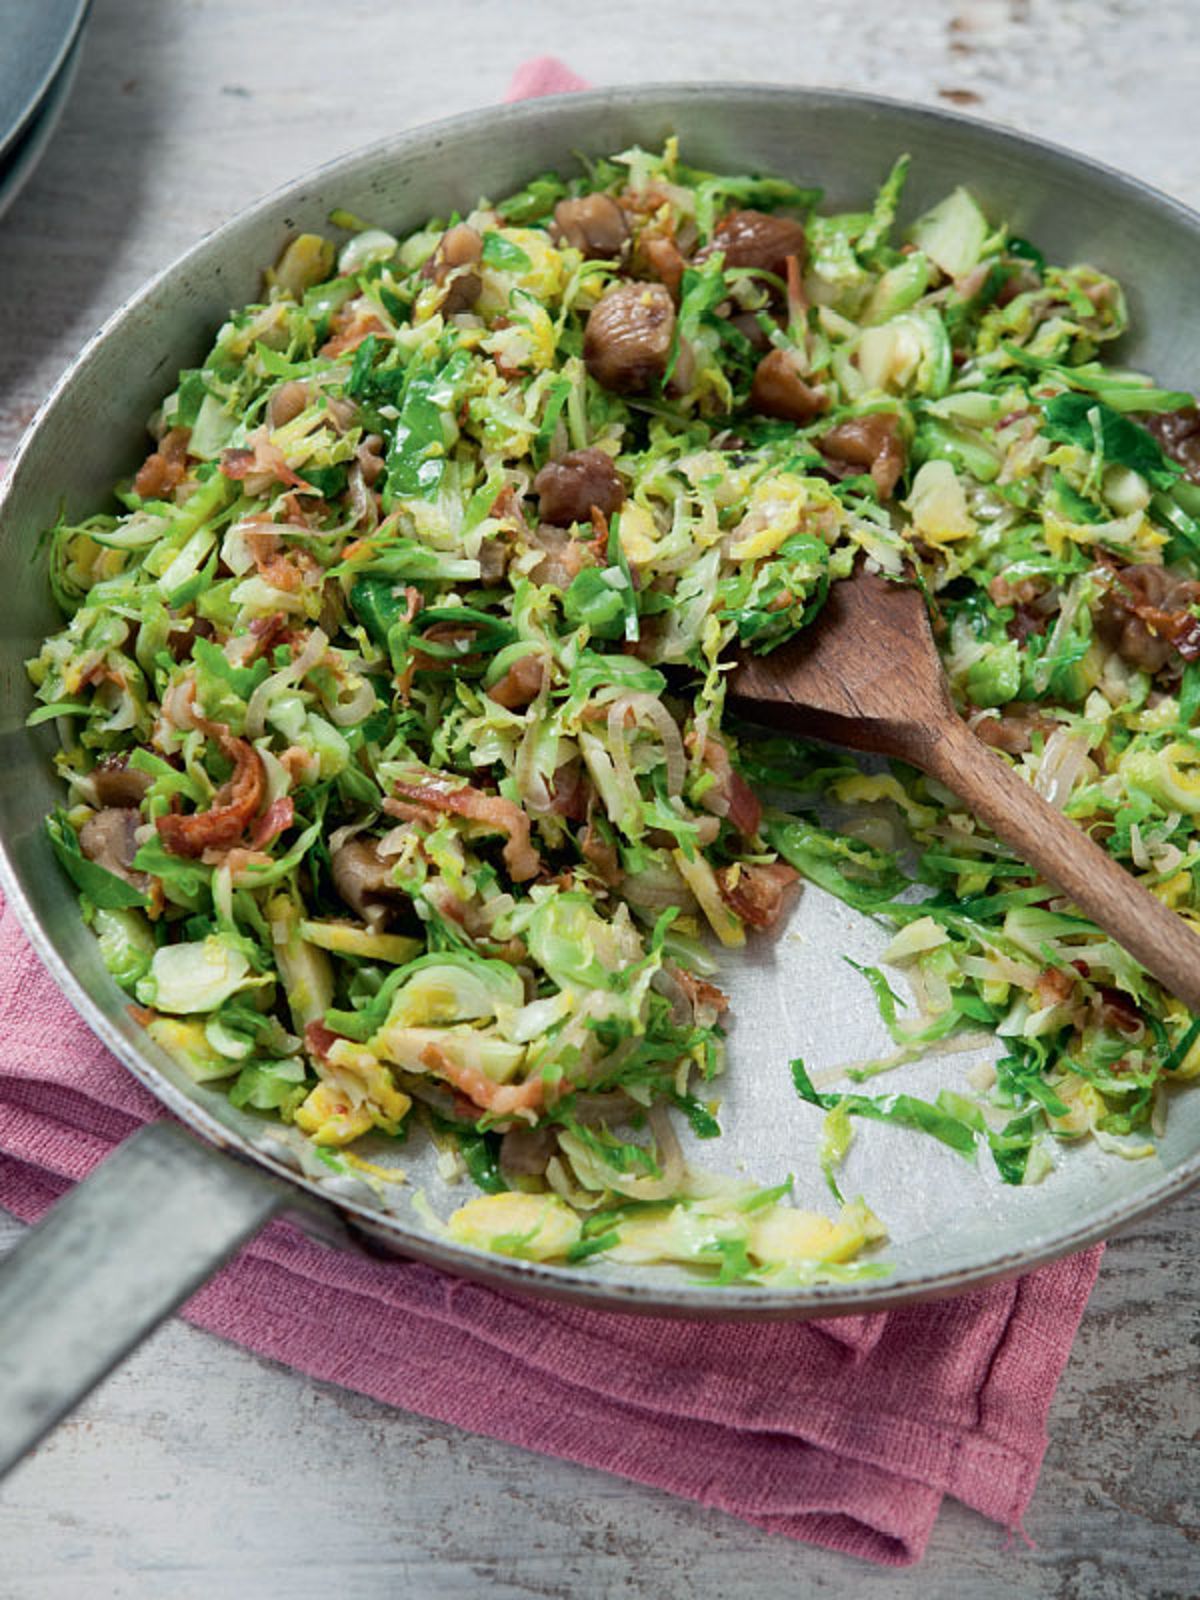 Stir-fried Brussels Sprouts with Chestnuts